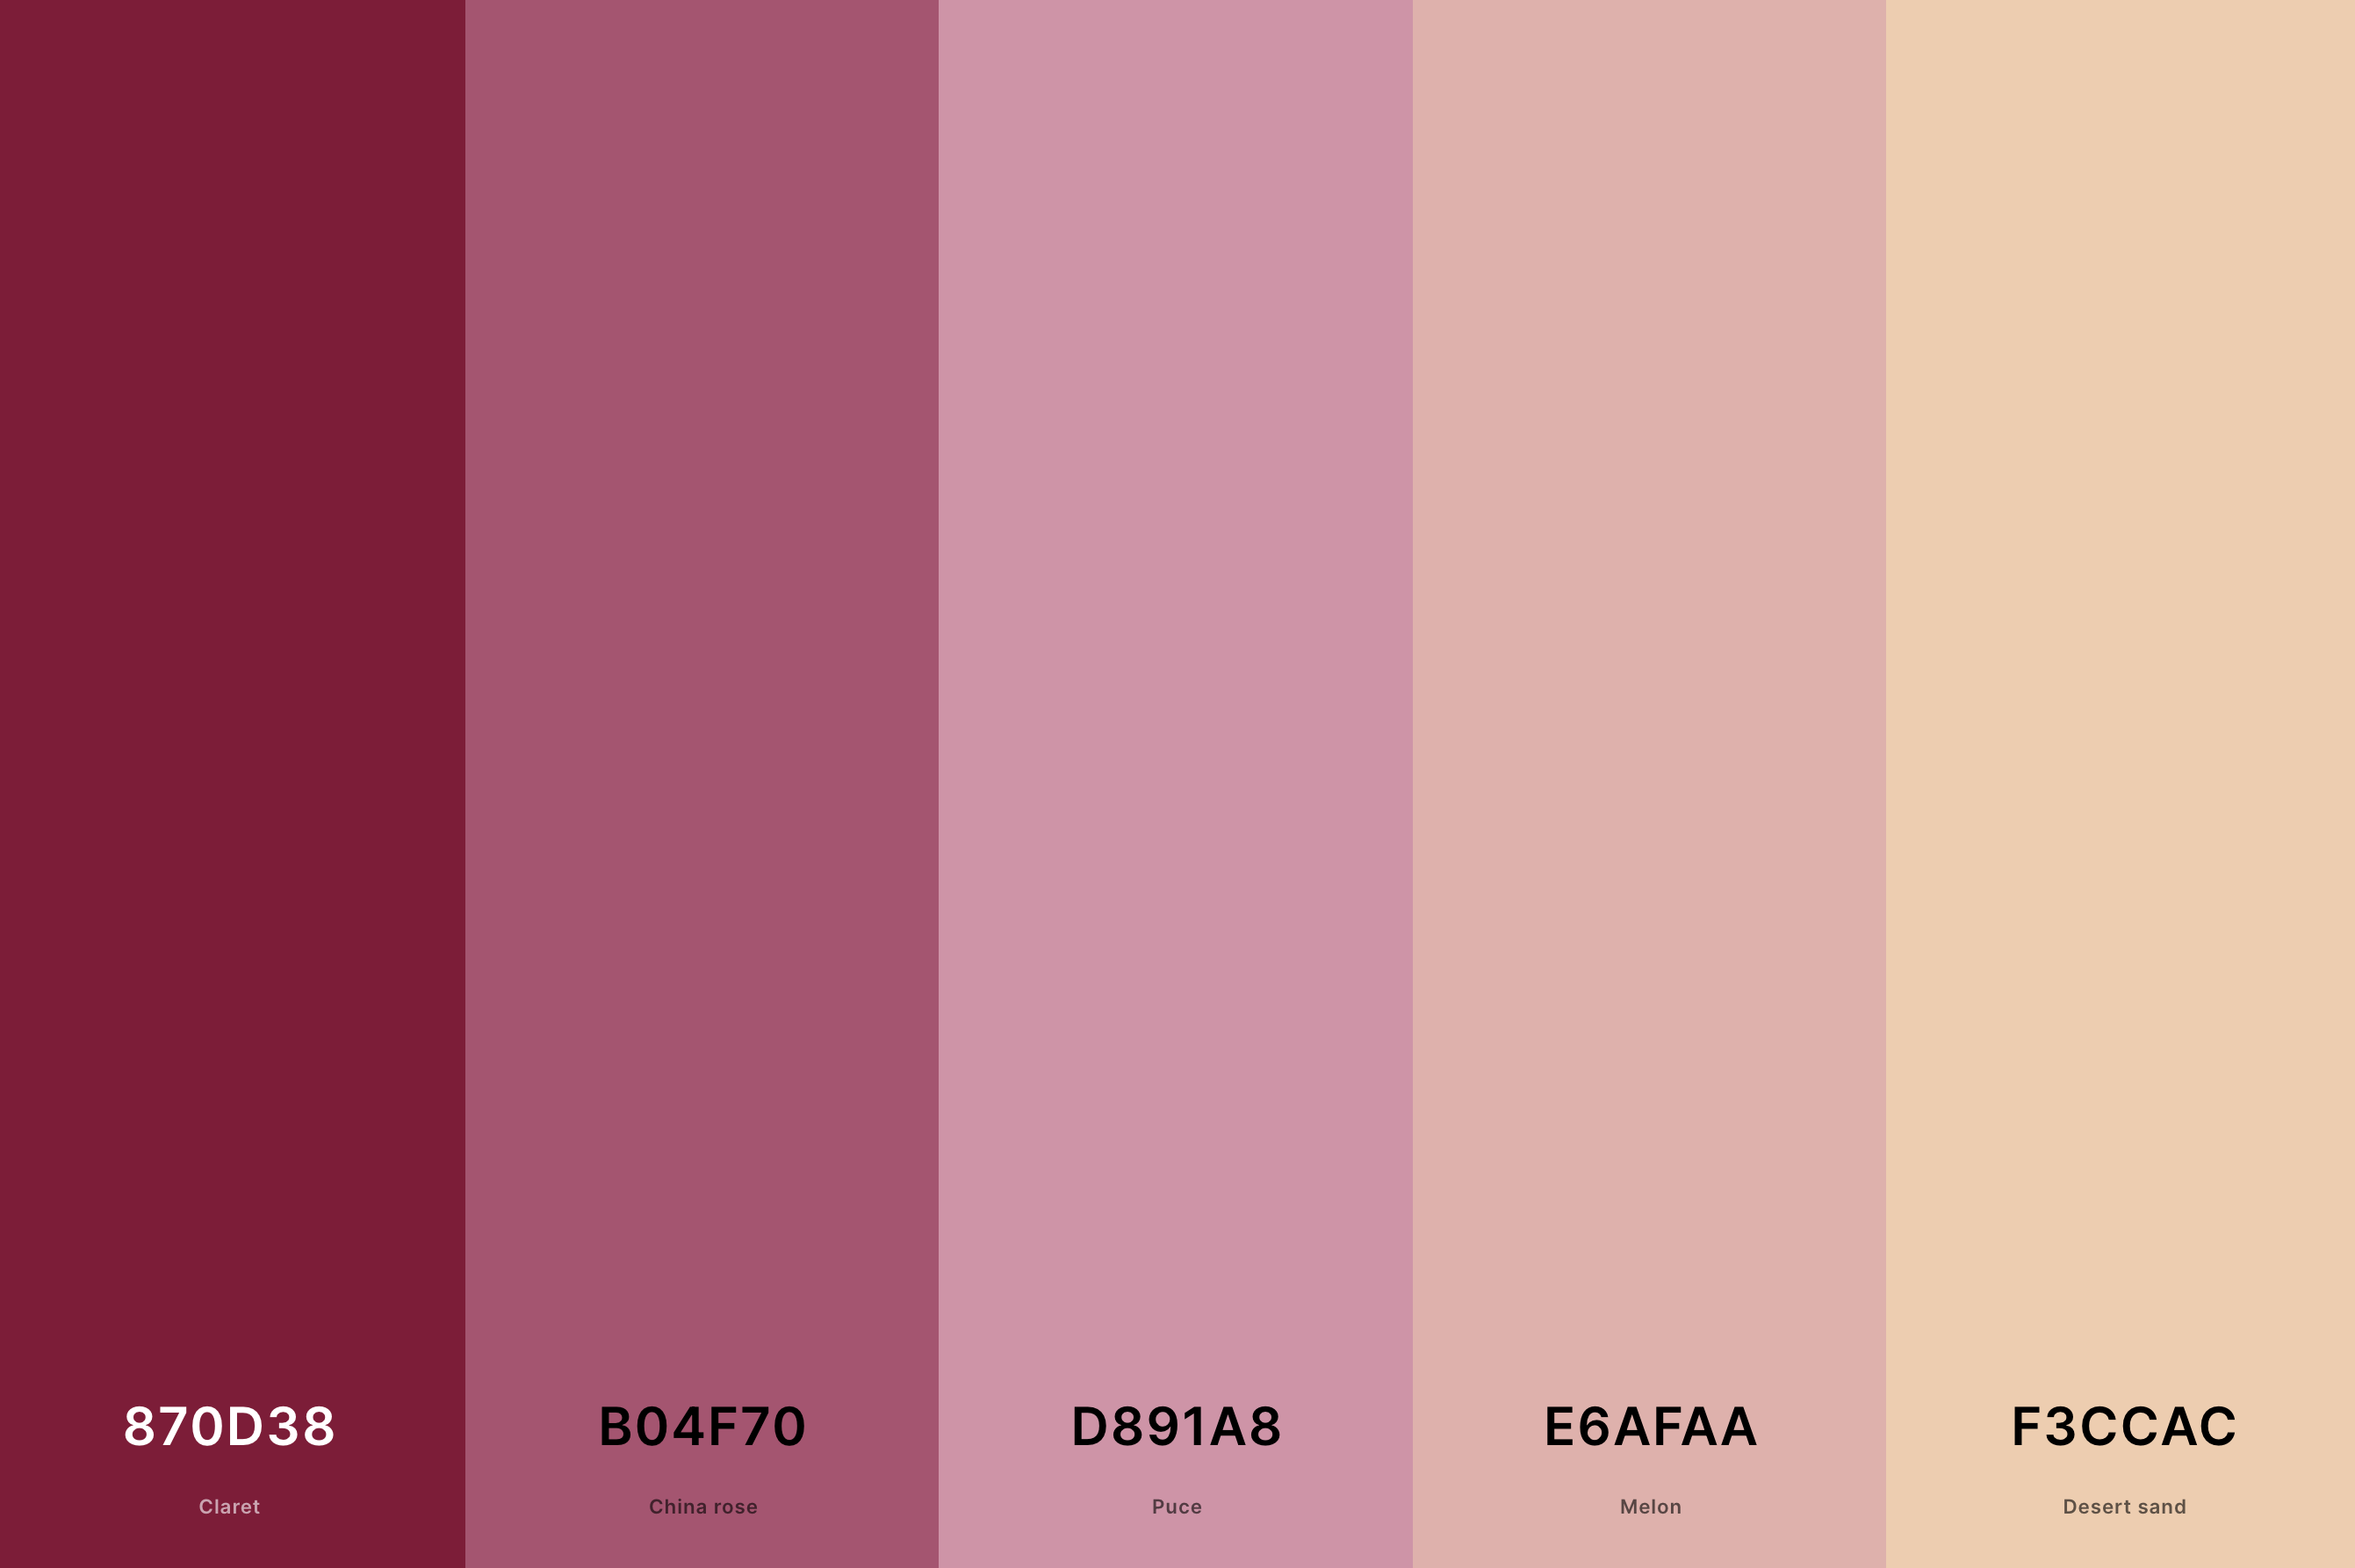 9. Sunset Wedding Color Palette Color Palette with Claret (Hex #870D38) + China Rose (Hex #B04F70) + Puce (Hex #D891A8) + Melon (Hex #E6AFAA) + Desert Sand (Hex #F3CCAC) Color Palette with Hex Codes